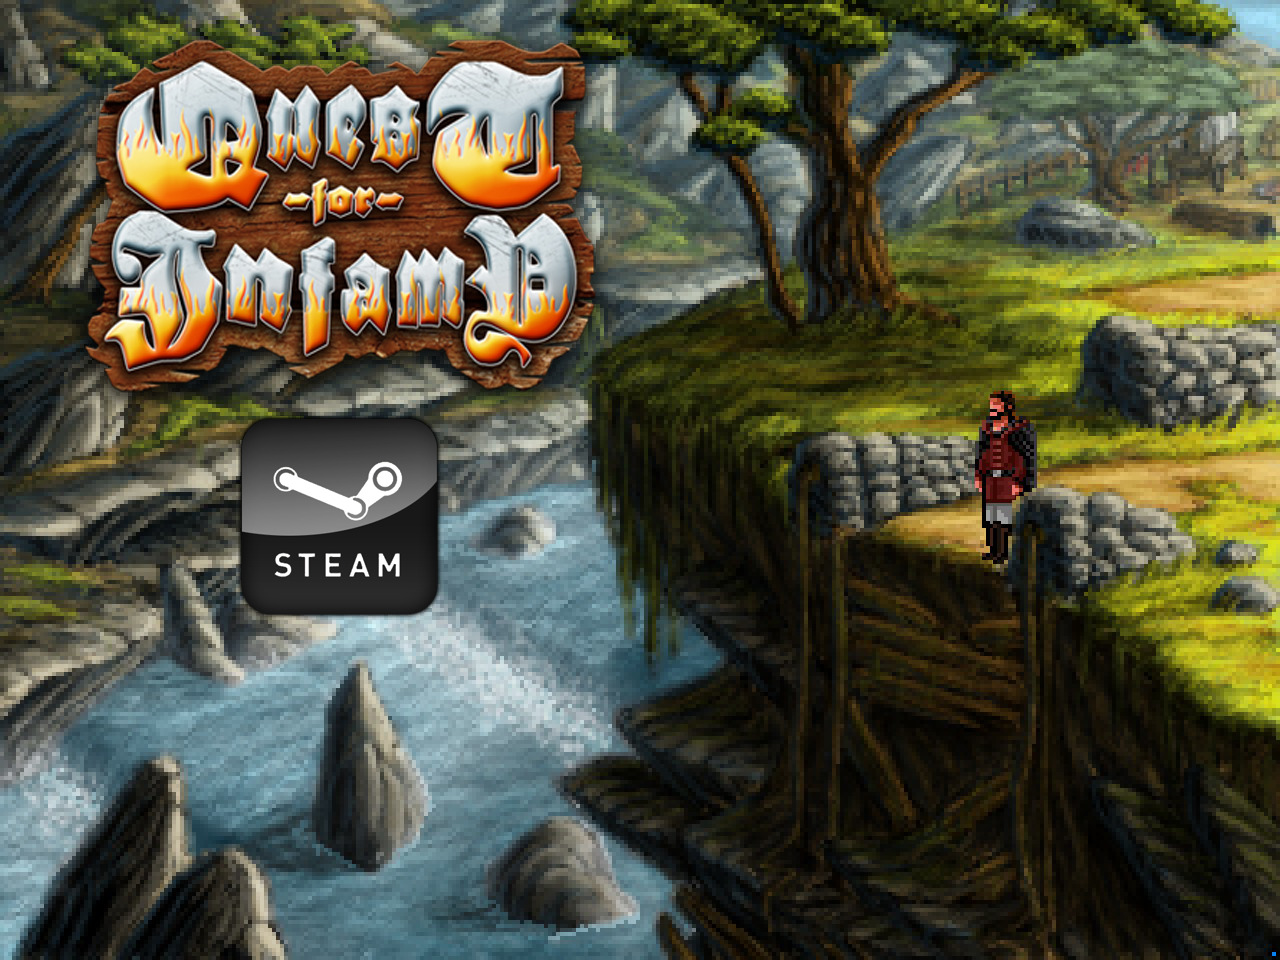 It&#8217;s finally here! Quest For Infamy, the indie Adventure/RPG hybrid was finally released on Steam!Inspired by Sierra On-Line&#8217;s classic Quest For Glory series you play as Roehm, a character of dubious morality who is only looking after Number 1.Featuring 3 selectable classes and over 200 hand-drawn screens to explore, it promises to be more ambitious than the Sierra titles of yesteryear that is inspired by.Gonçalo GonçalvesSocial Media AssociatePhoenix Online Studios